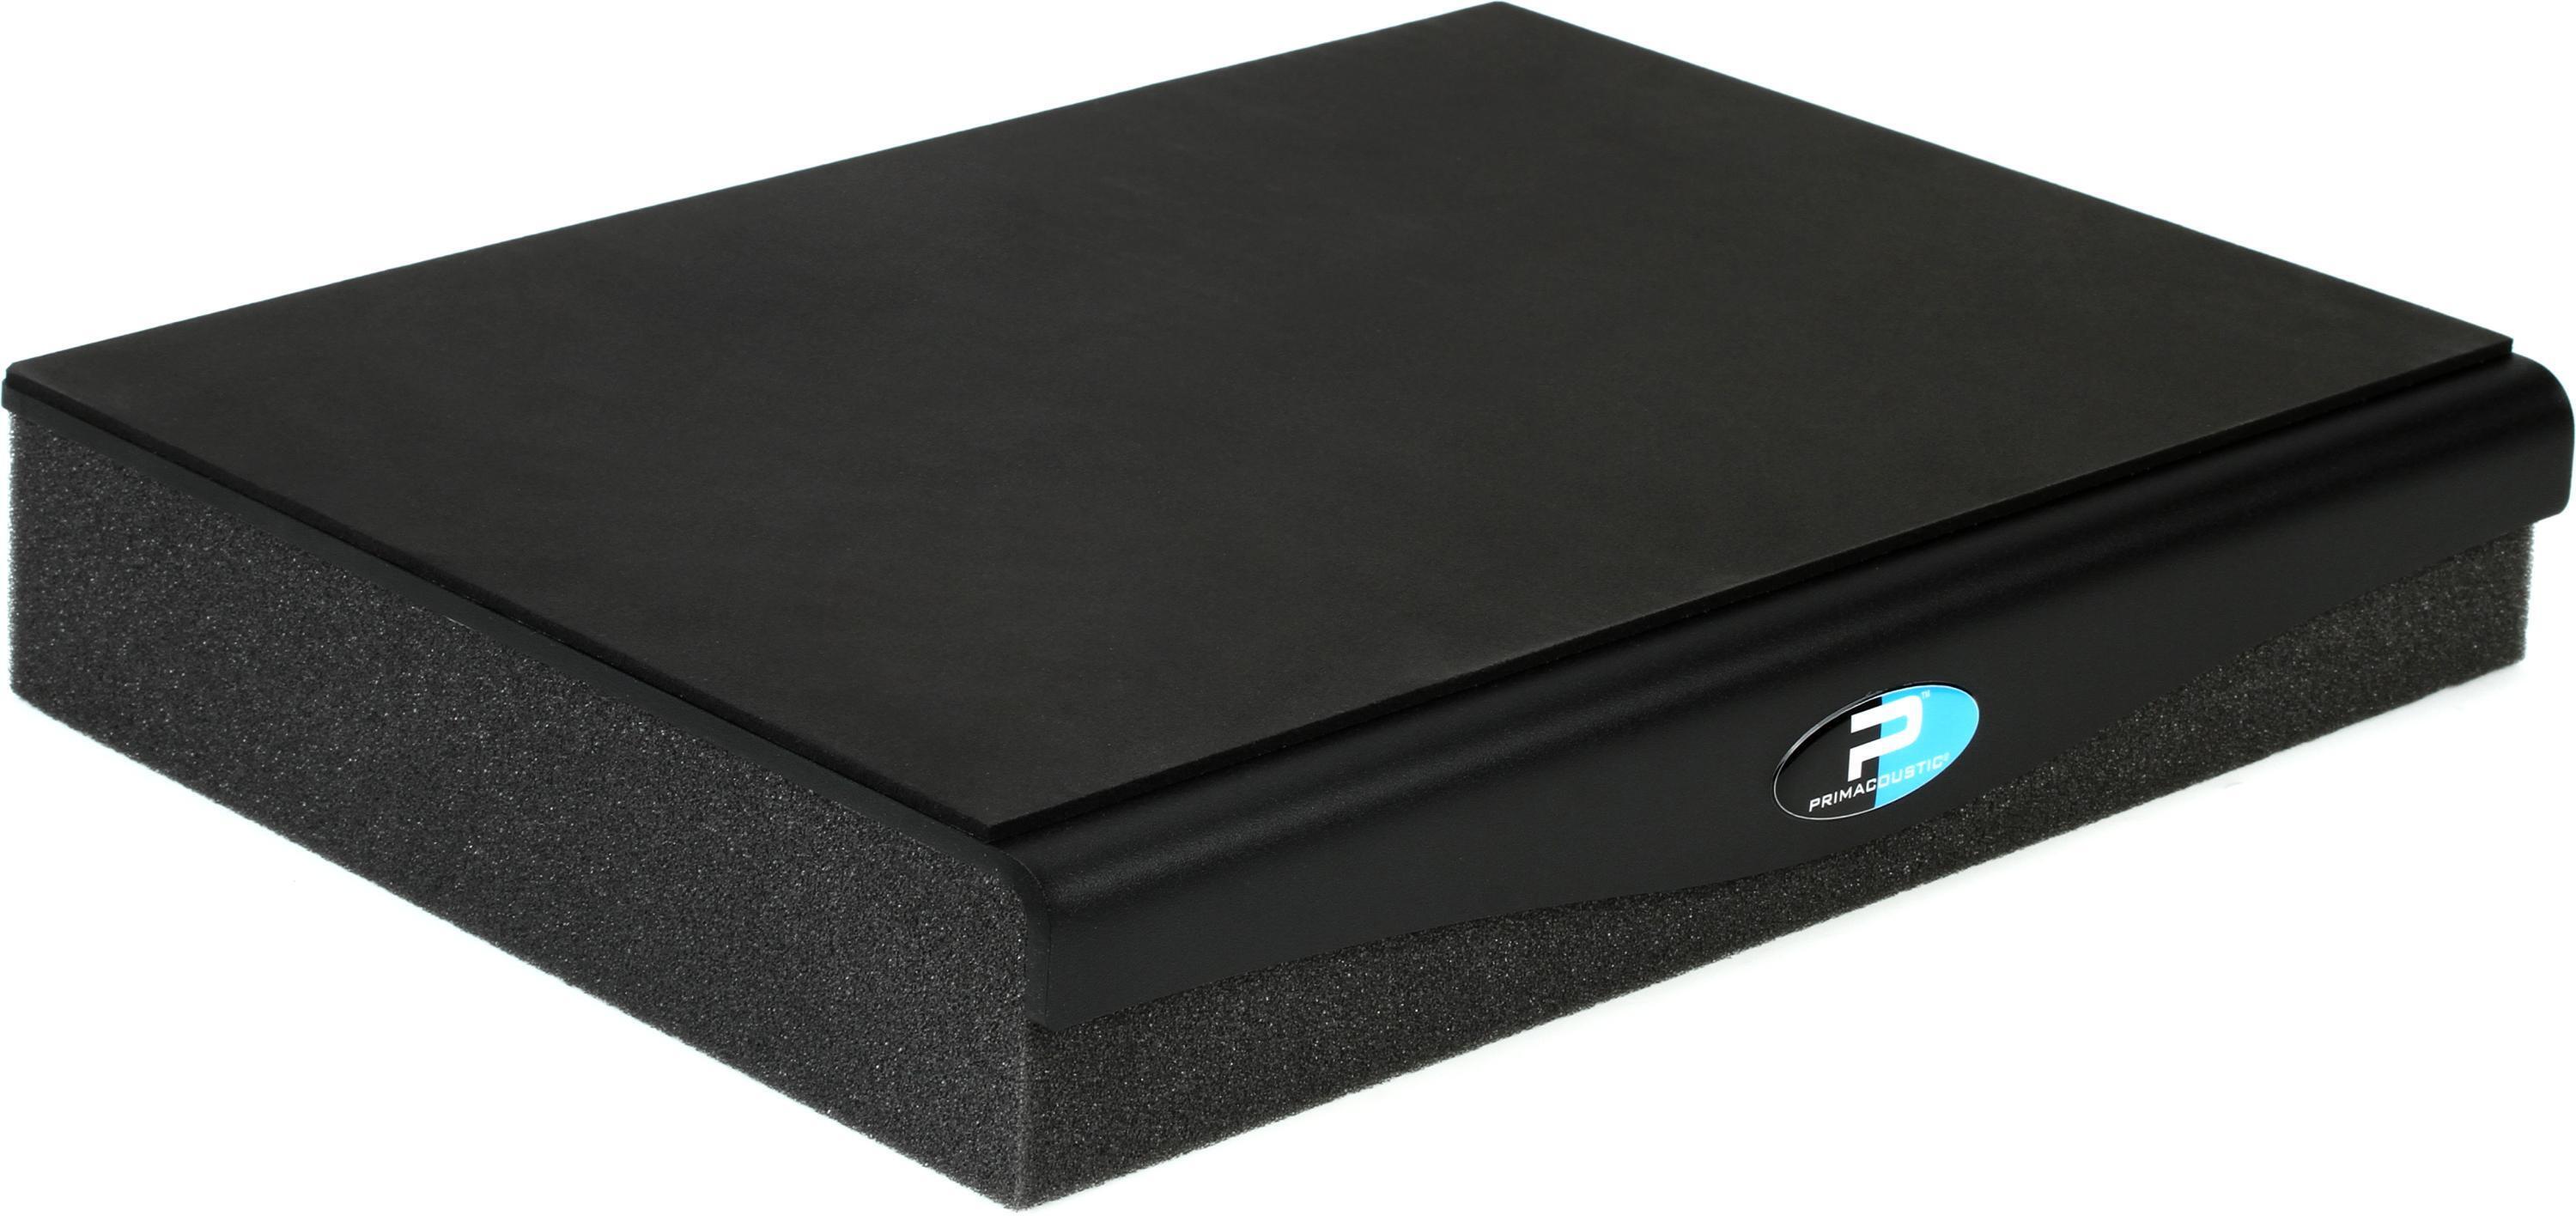 Primacoustic RX7 Monitor Isolation Pad 10.5 x 13 inch (Flat